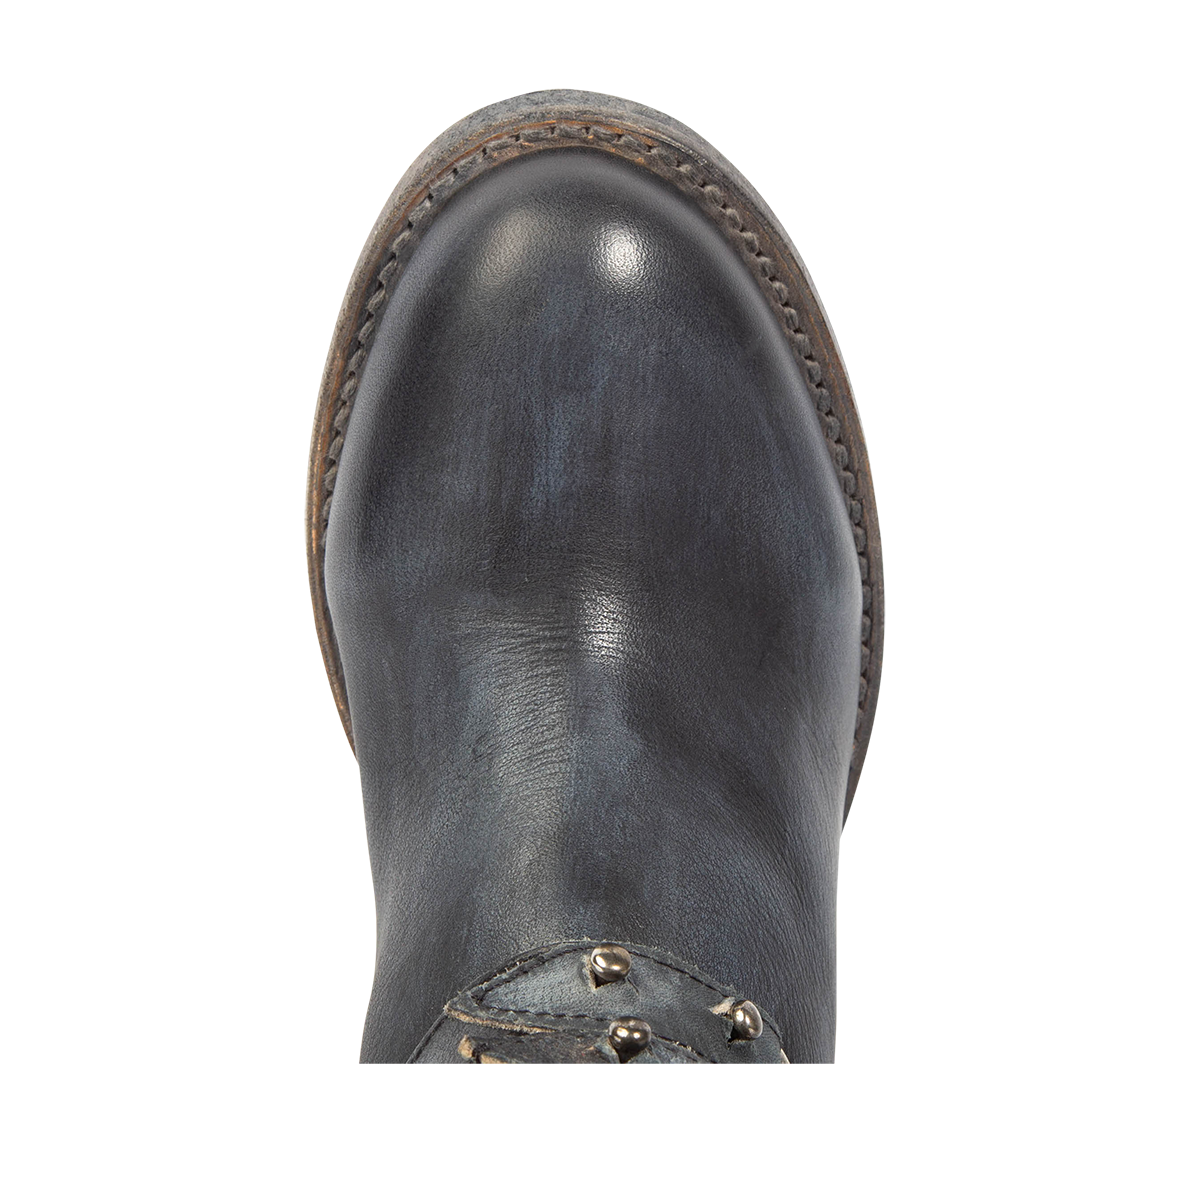 Top view showing round toe on FREEBIRD women's Rory navy leather boot